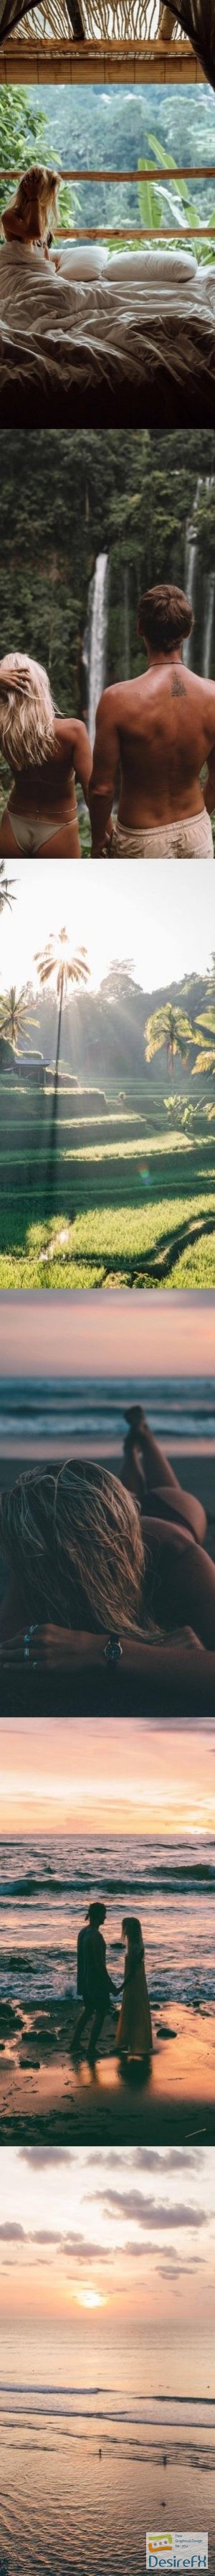 DOYOUTRAVEL X GYPSEALUST Presets - Bali Collection